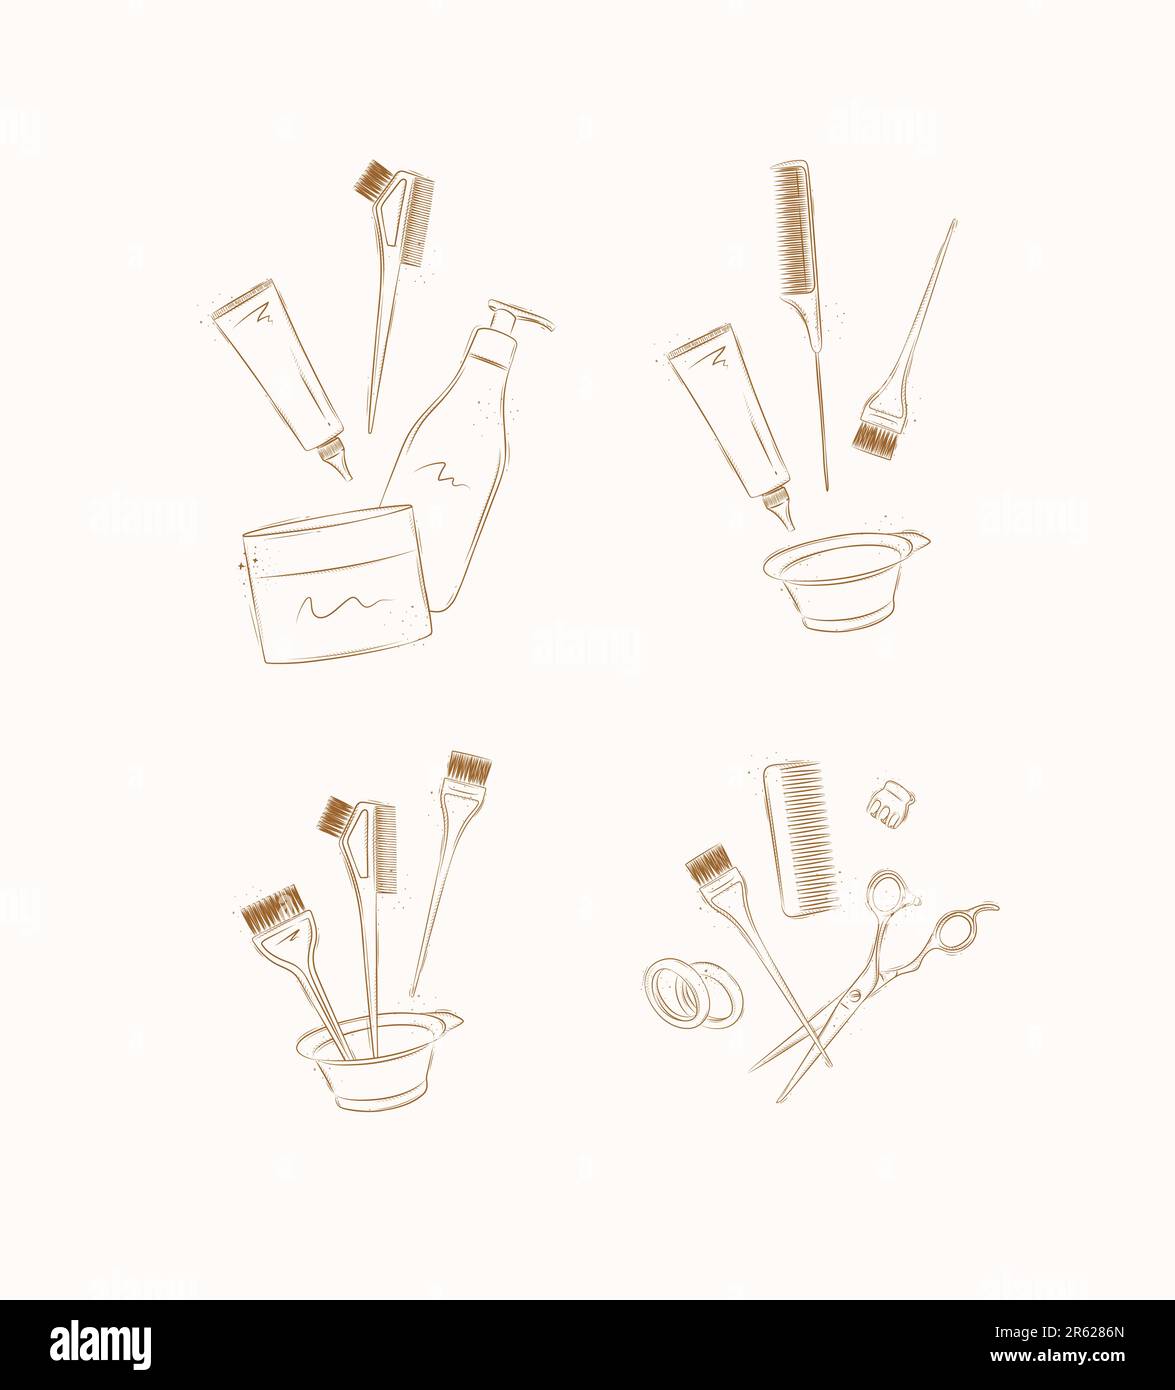 Hair dye tools and accessories compositions drawing on brown background Stock Vector